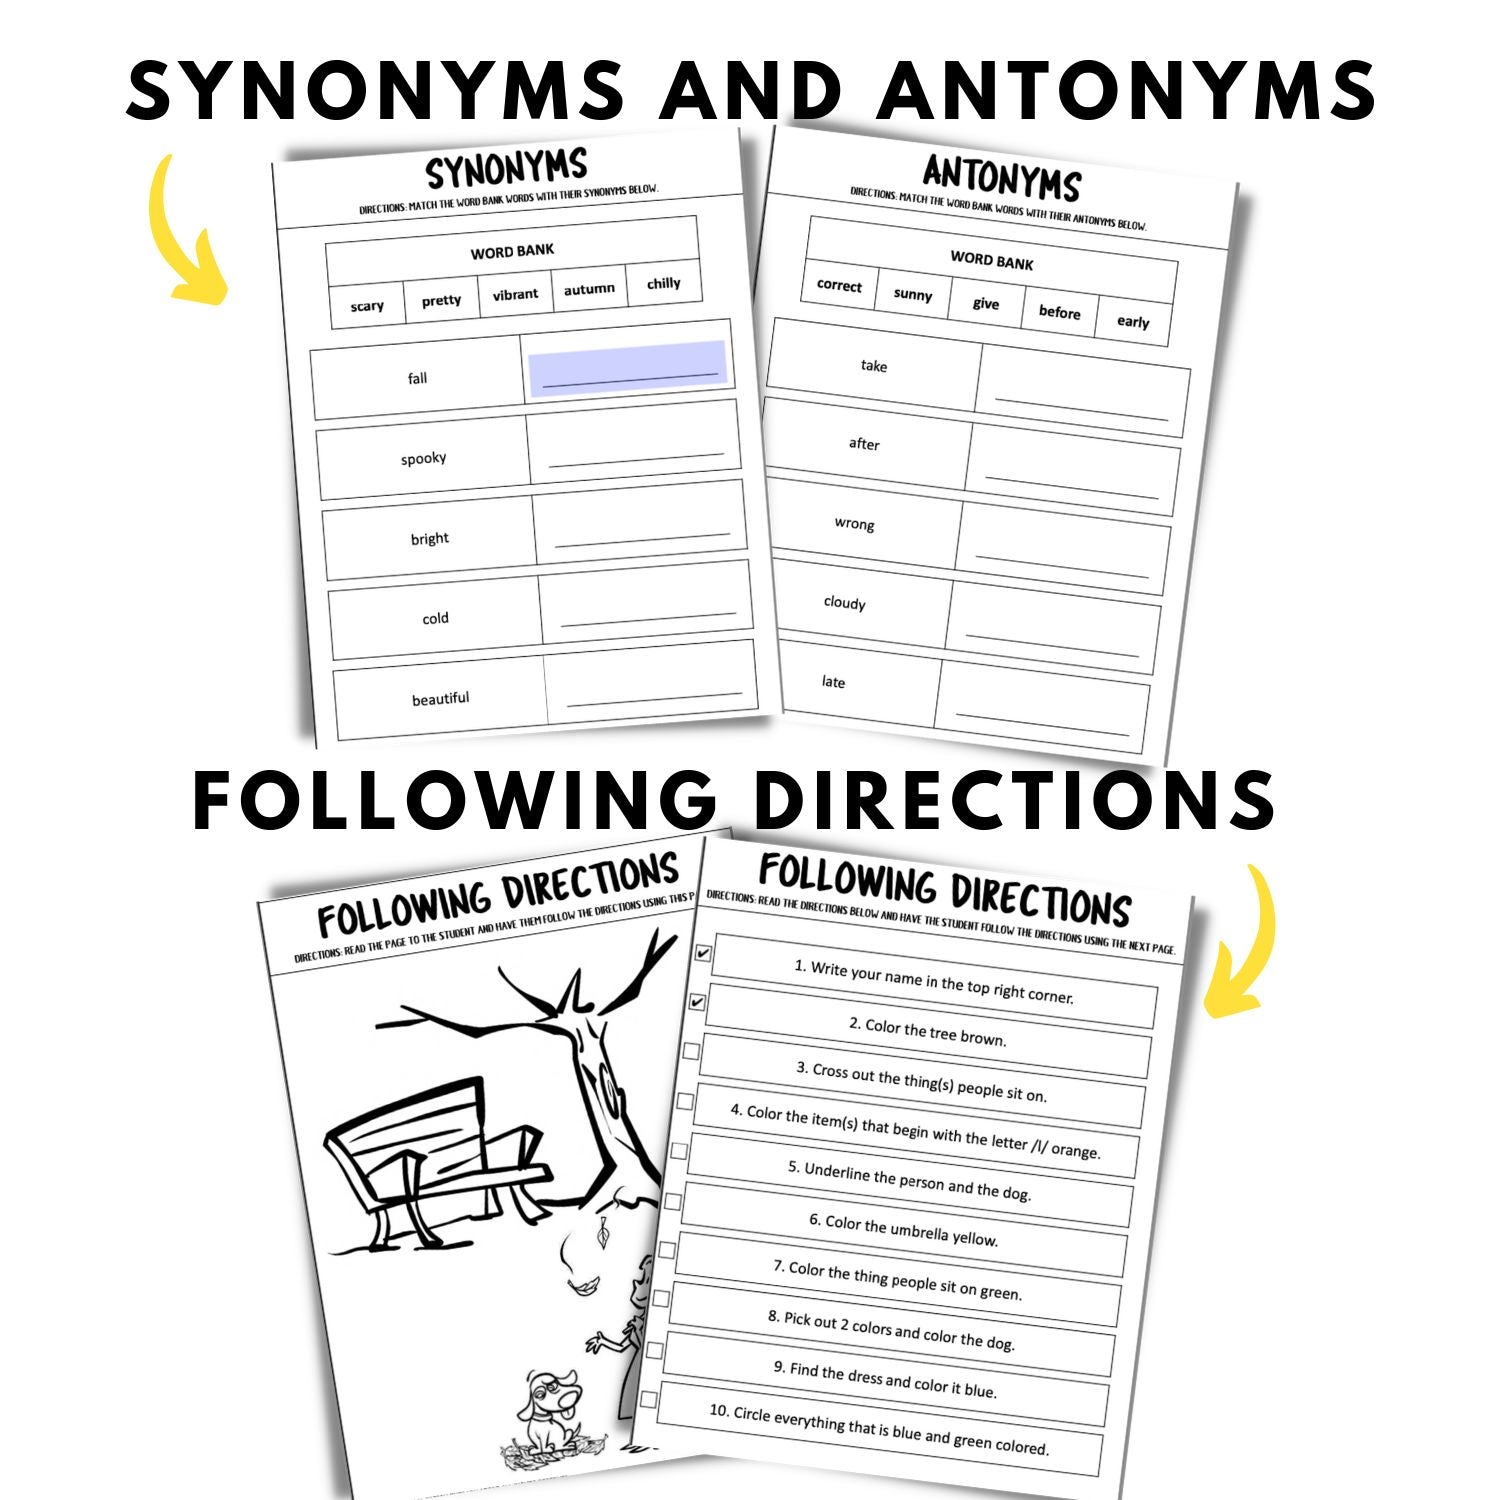 speech-therapy-fall-synonyms-and-antonyms